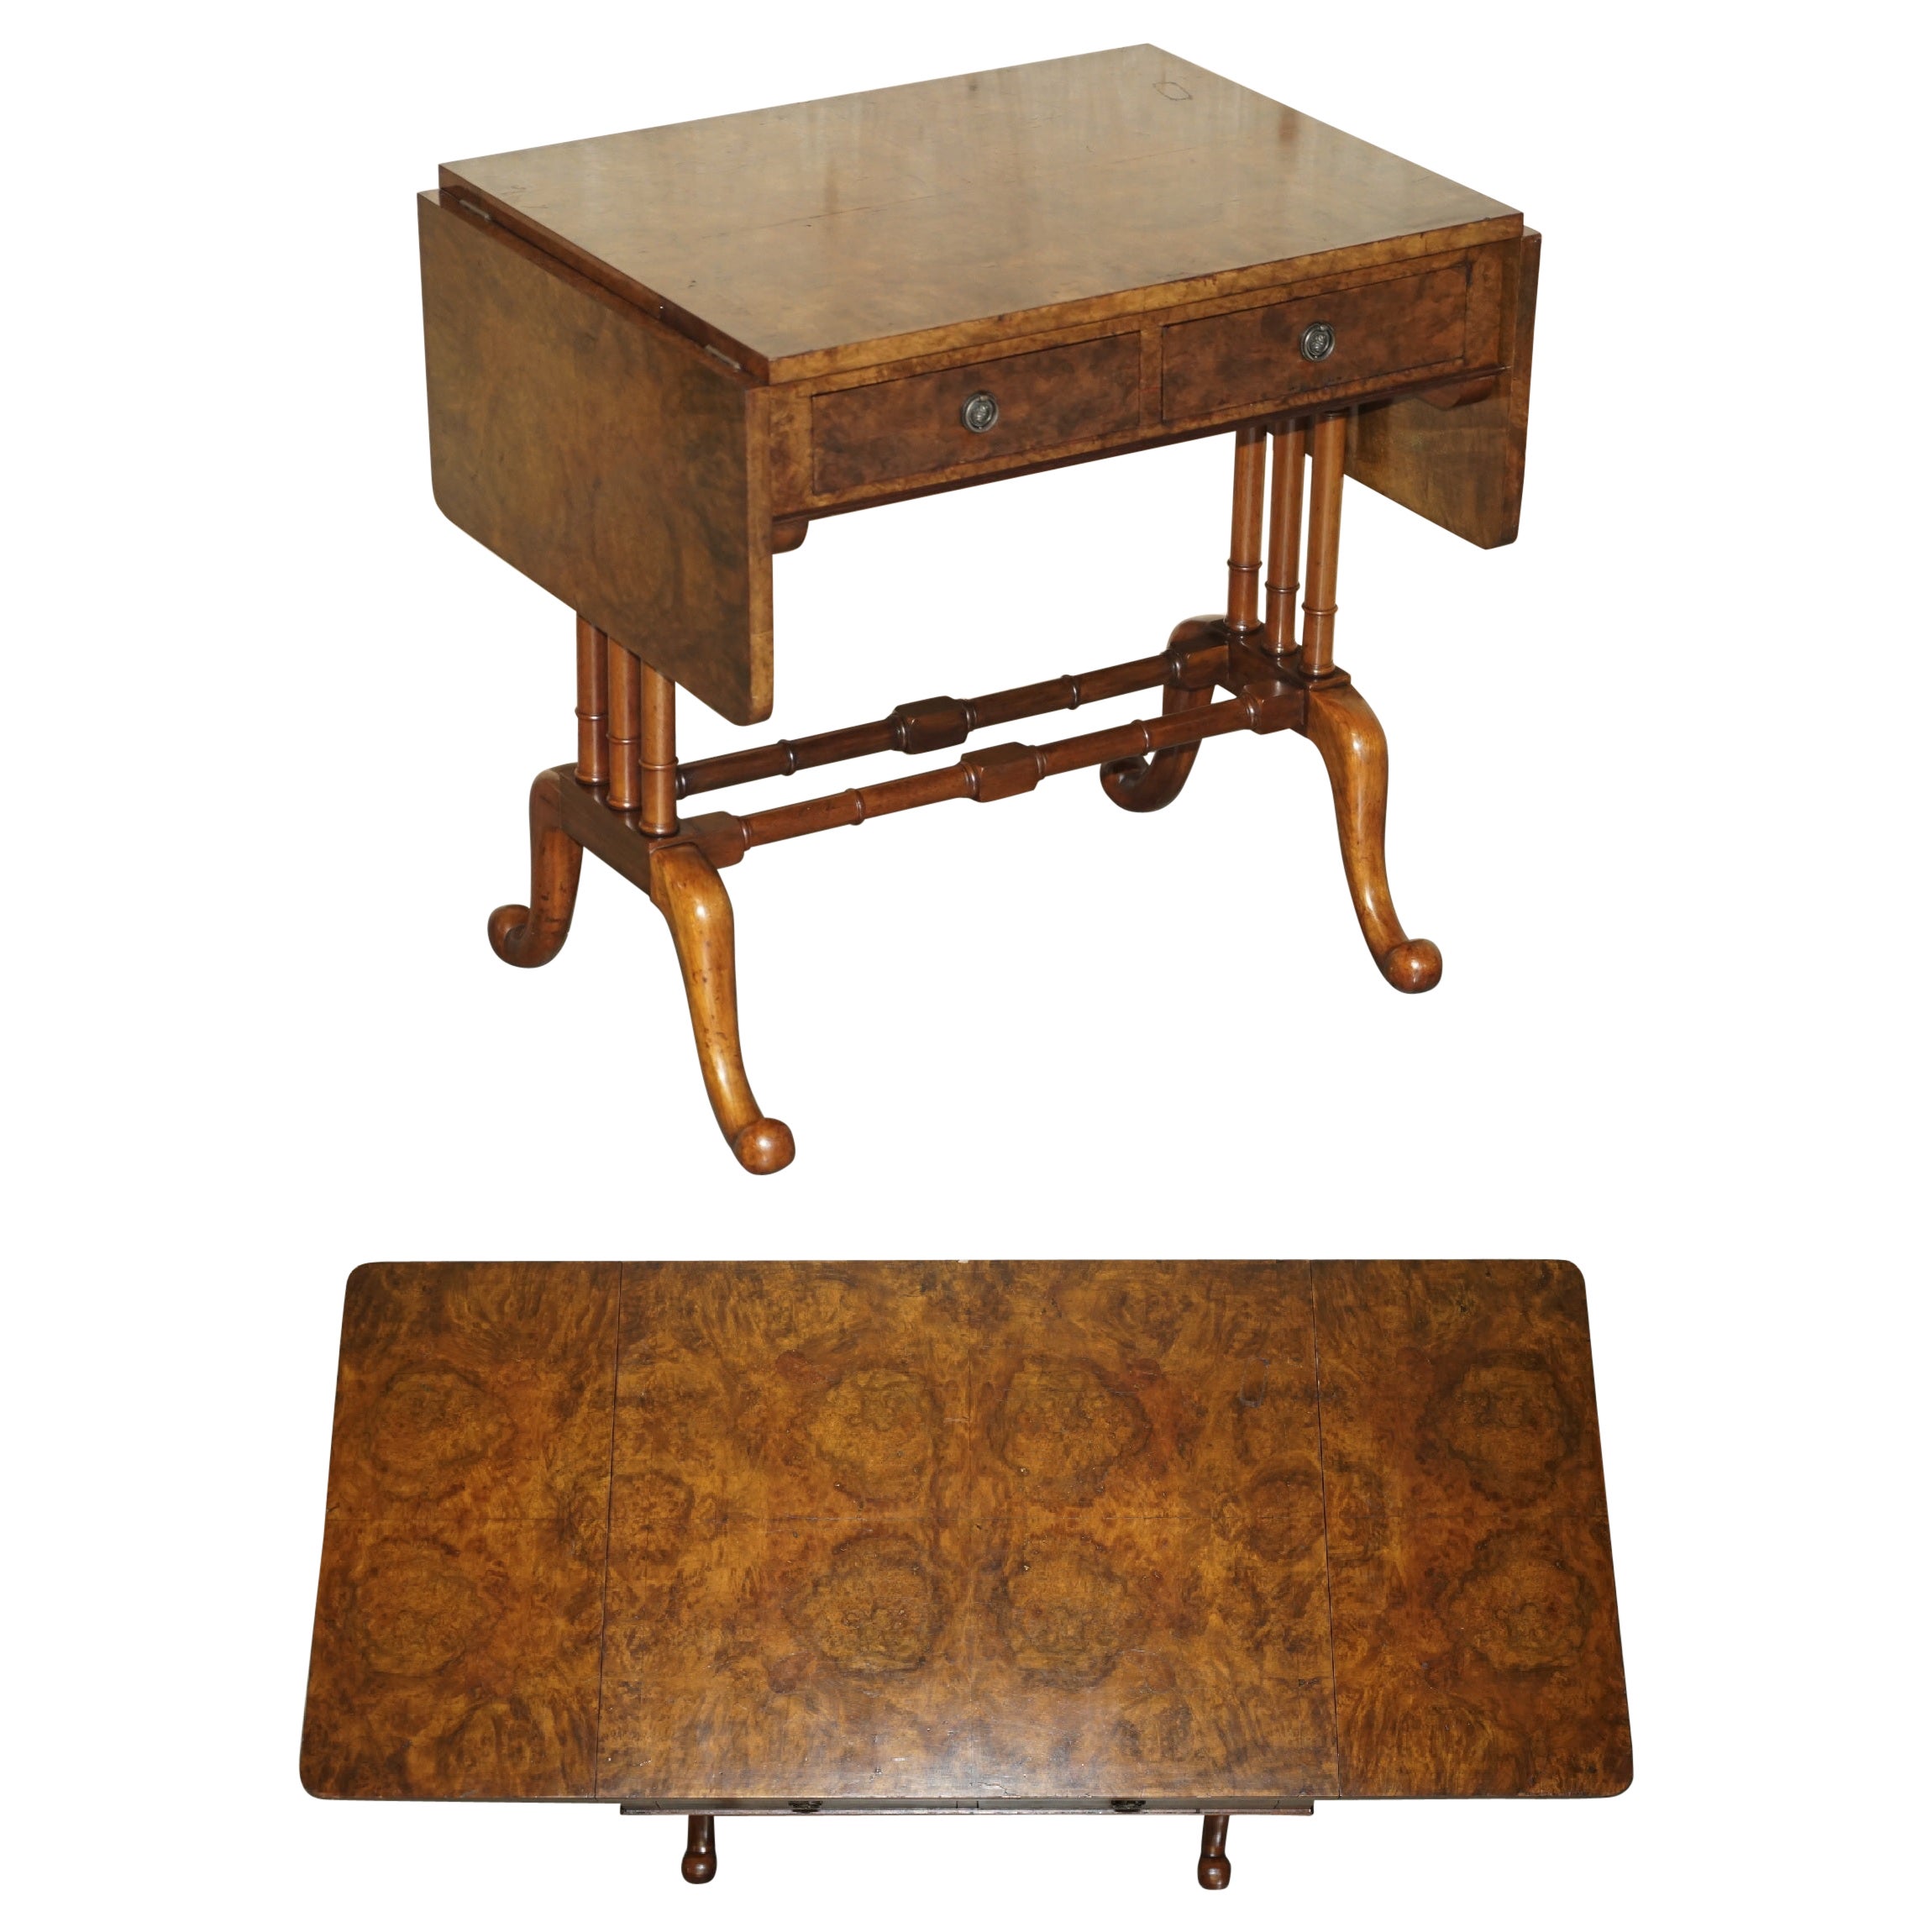 ANTIQUE CIRCA 1880 EXTRA LARGE BURR WALNUT EXTENDING SOFA TABLE STUNNING PATiNA For Sale